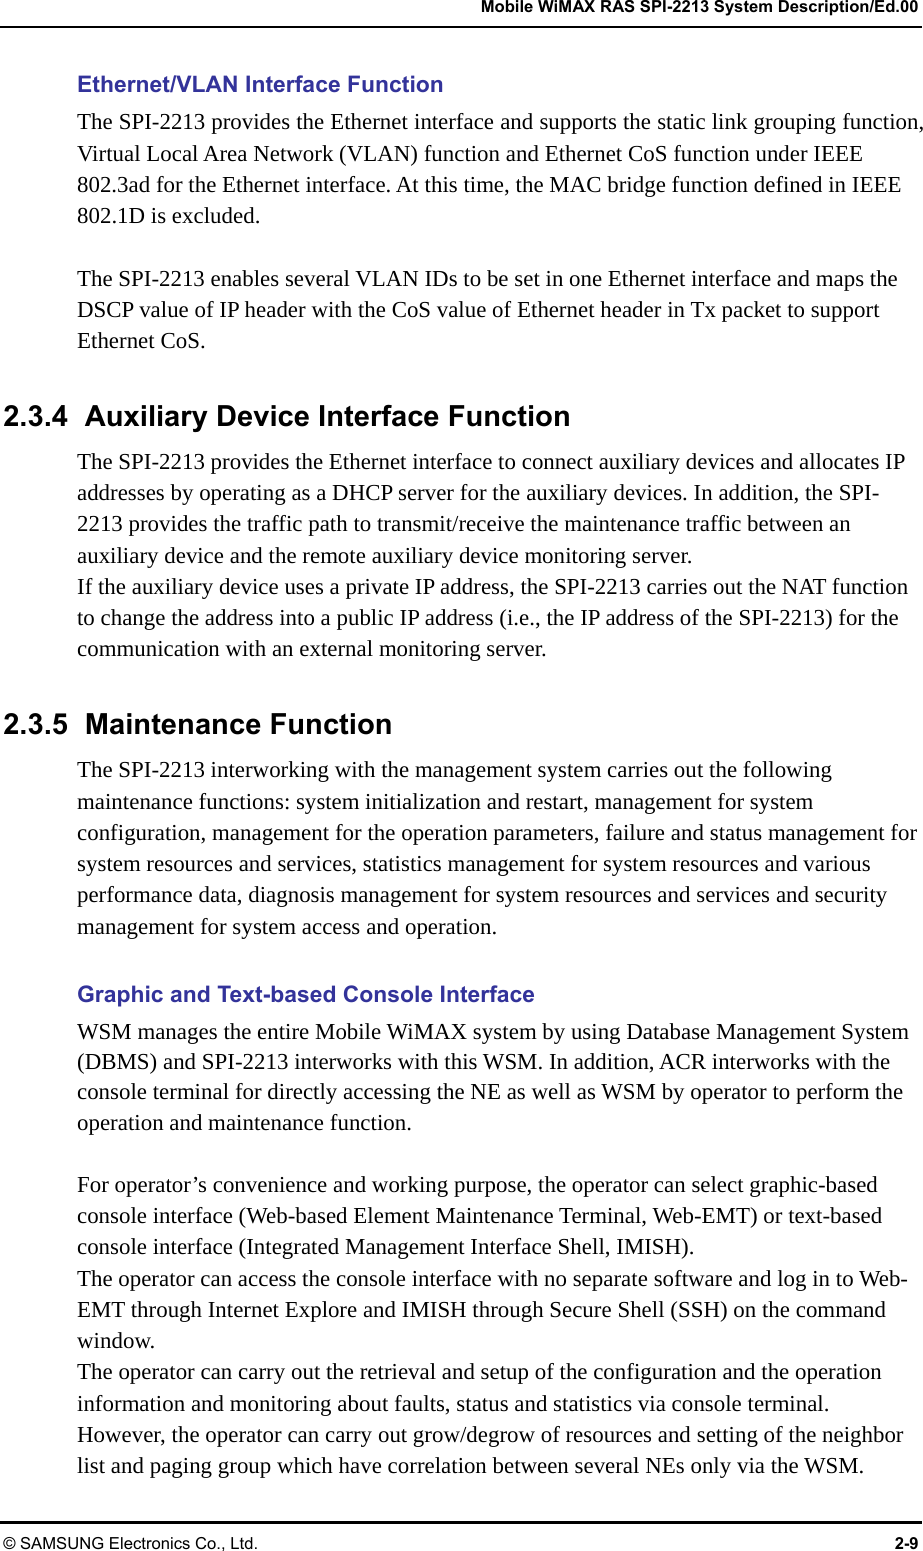   Mobile WiMAX RAS SPI-2213 System Description/Ed.00 © SAMSUNG Electronics Co., Ltd.  2-9 Ethernet/VLAN Interface Function The SPI-2213 provides the Ethernet interface and supports the static link grouping function, Virtual Local Area Network (VLAN) function and Ethernet CoS function under IEEE 802.3ad for the Ethernet interface. At this time, the MAC bridge function defined in IEEE 802.1D is excluded.  The SPI-2213 enables several VLAN IDs to be set in one Ethernet interface and maps the DSCP value of IP header with the CoS value of Ethernet header in Tx packet to support Ethernet CoS.  2.3.4  Auxiliary Device Interface Function The SPI-2213 provides the Ethernet interface to connect auxiliary devices and allocates IP addresses by operating as a DHCP server for the auxiliary devices. In addition, the SPI-2213 provides the traffic path to transmit/receive the maintenance traffic between an auxiliary device and the remote auxiliary device monitoring server. If the auxiliary device uses a private IP address, the SPI-2213 carries out the NAT function to change the address into a public IP address (i.e., the IP address of the SPI-2213) for the communication with an external monitoring server.  2.3.5 Maintenance Function The SPI-2213 interworking with the management system carries out the following maintenance functions: system initialization and restart, management for system configuration, management for the operation parameters, failure and status management for system resources and services, statistics management for system resources and various performance data, diagnosis management for system resources and services and security management for system access and operation.  Graphic and Text-based Console Interface WSM manages the entire Mobile WiMAX system by using Database Management System (DBMS) and SPI-2213 interworks with this WSM. In addition, ACR interworks with the console terminal for directly accessing the NE as well as WSM by operator to perform the operation and maintenance function.    For operator’s convenience and working purpose, the operator can select graphic-based console interface (Web-based Element Maintenance Terminal, Web-EMT) or text-based console interface (Integrated Management Interface Shell, IMISH). The operator can access the console interface with no separate software and log in to Web-EMT through Internet Explore and IMISH through Secure Shell (SSH) on the command window. The operator can carry out the retrieval and setup of the configuration and the operation information and monitoring about faults, status and statistics via console terminal. However, the operator can carry out grow/degrow of resources and setting of the neighbor list and paging group which have correlation between several NEs only via the WSM. 